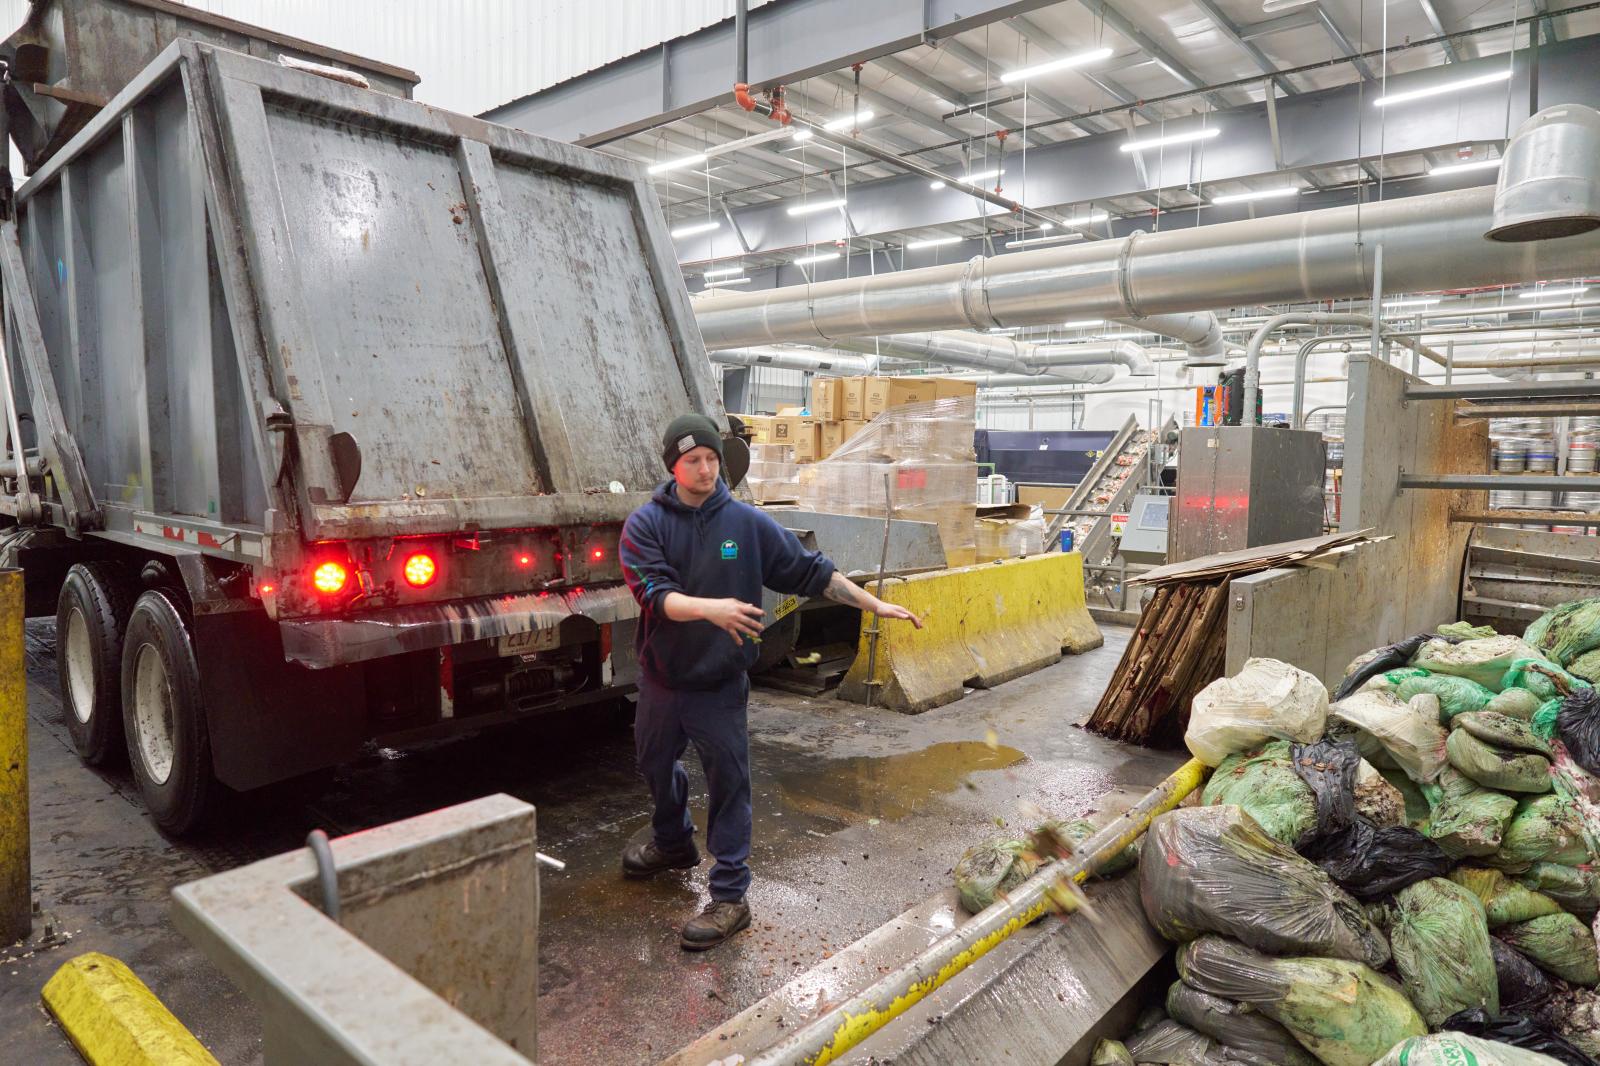 The Smithsonian Magazine: Manure Into Money - Agawam, Massachusetts - January 12: Food waste is dumped at the processing facility on January...